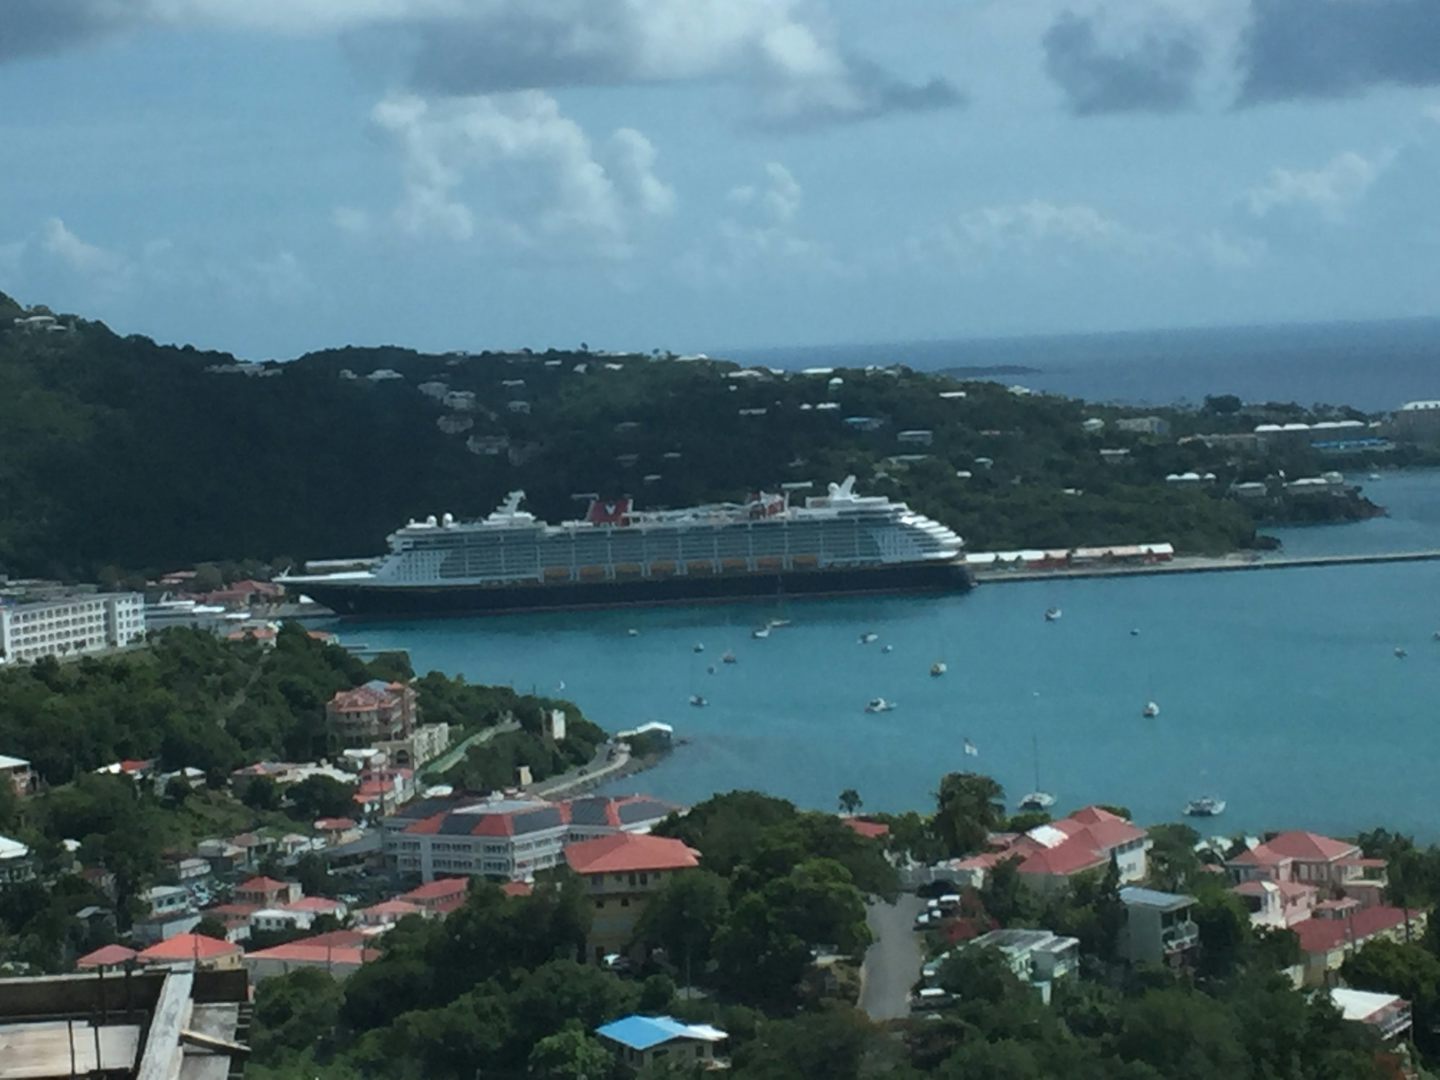 View of ship from St. Thomas